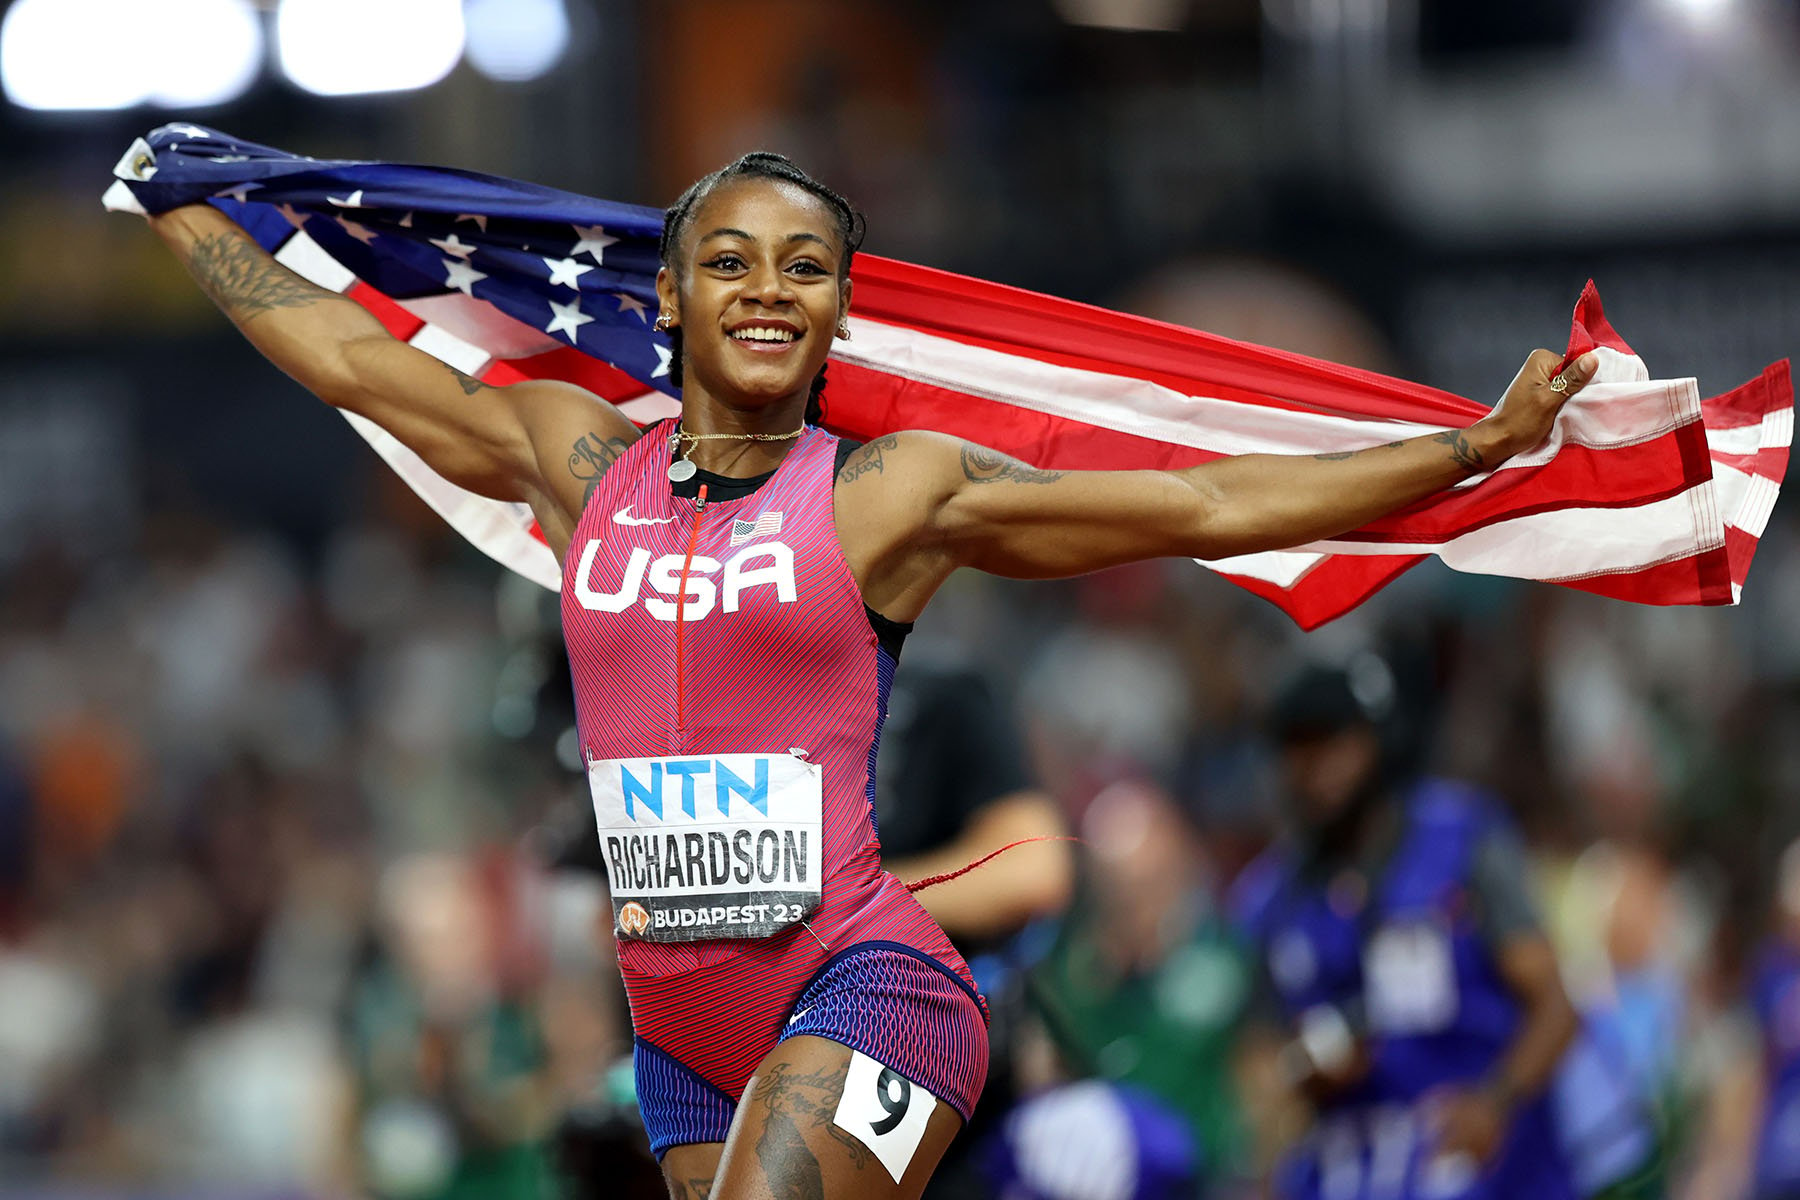 Sha'Carri Richardson celebrates with an American flag after winning a race.